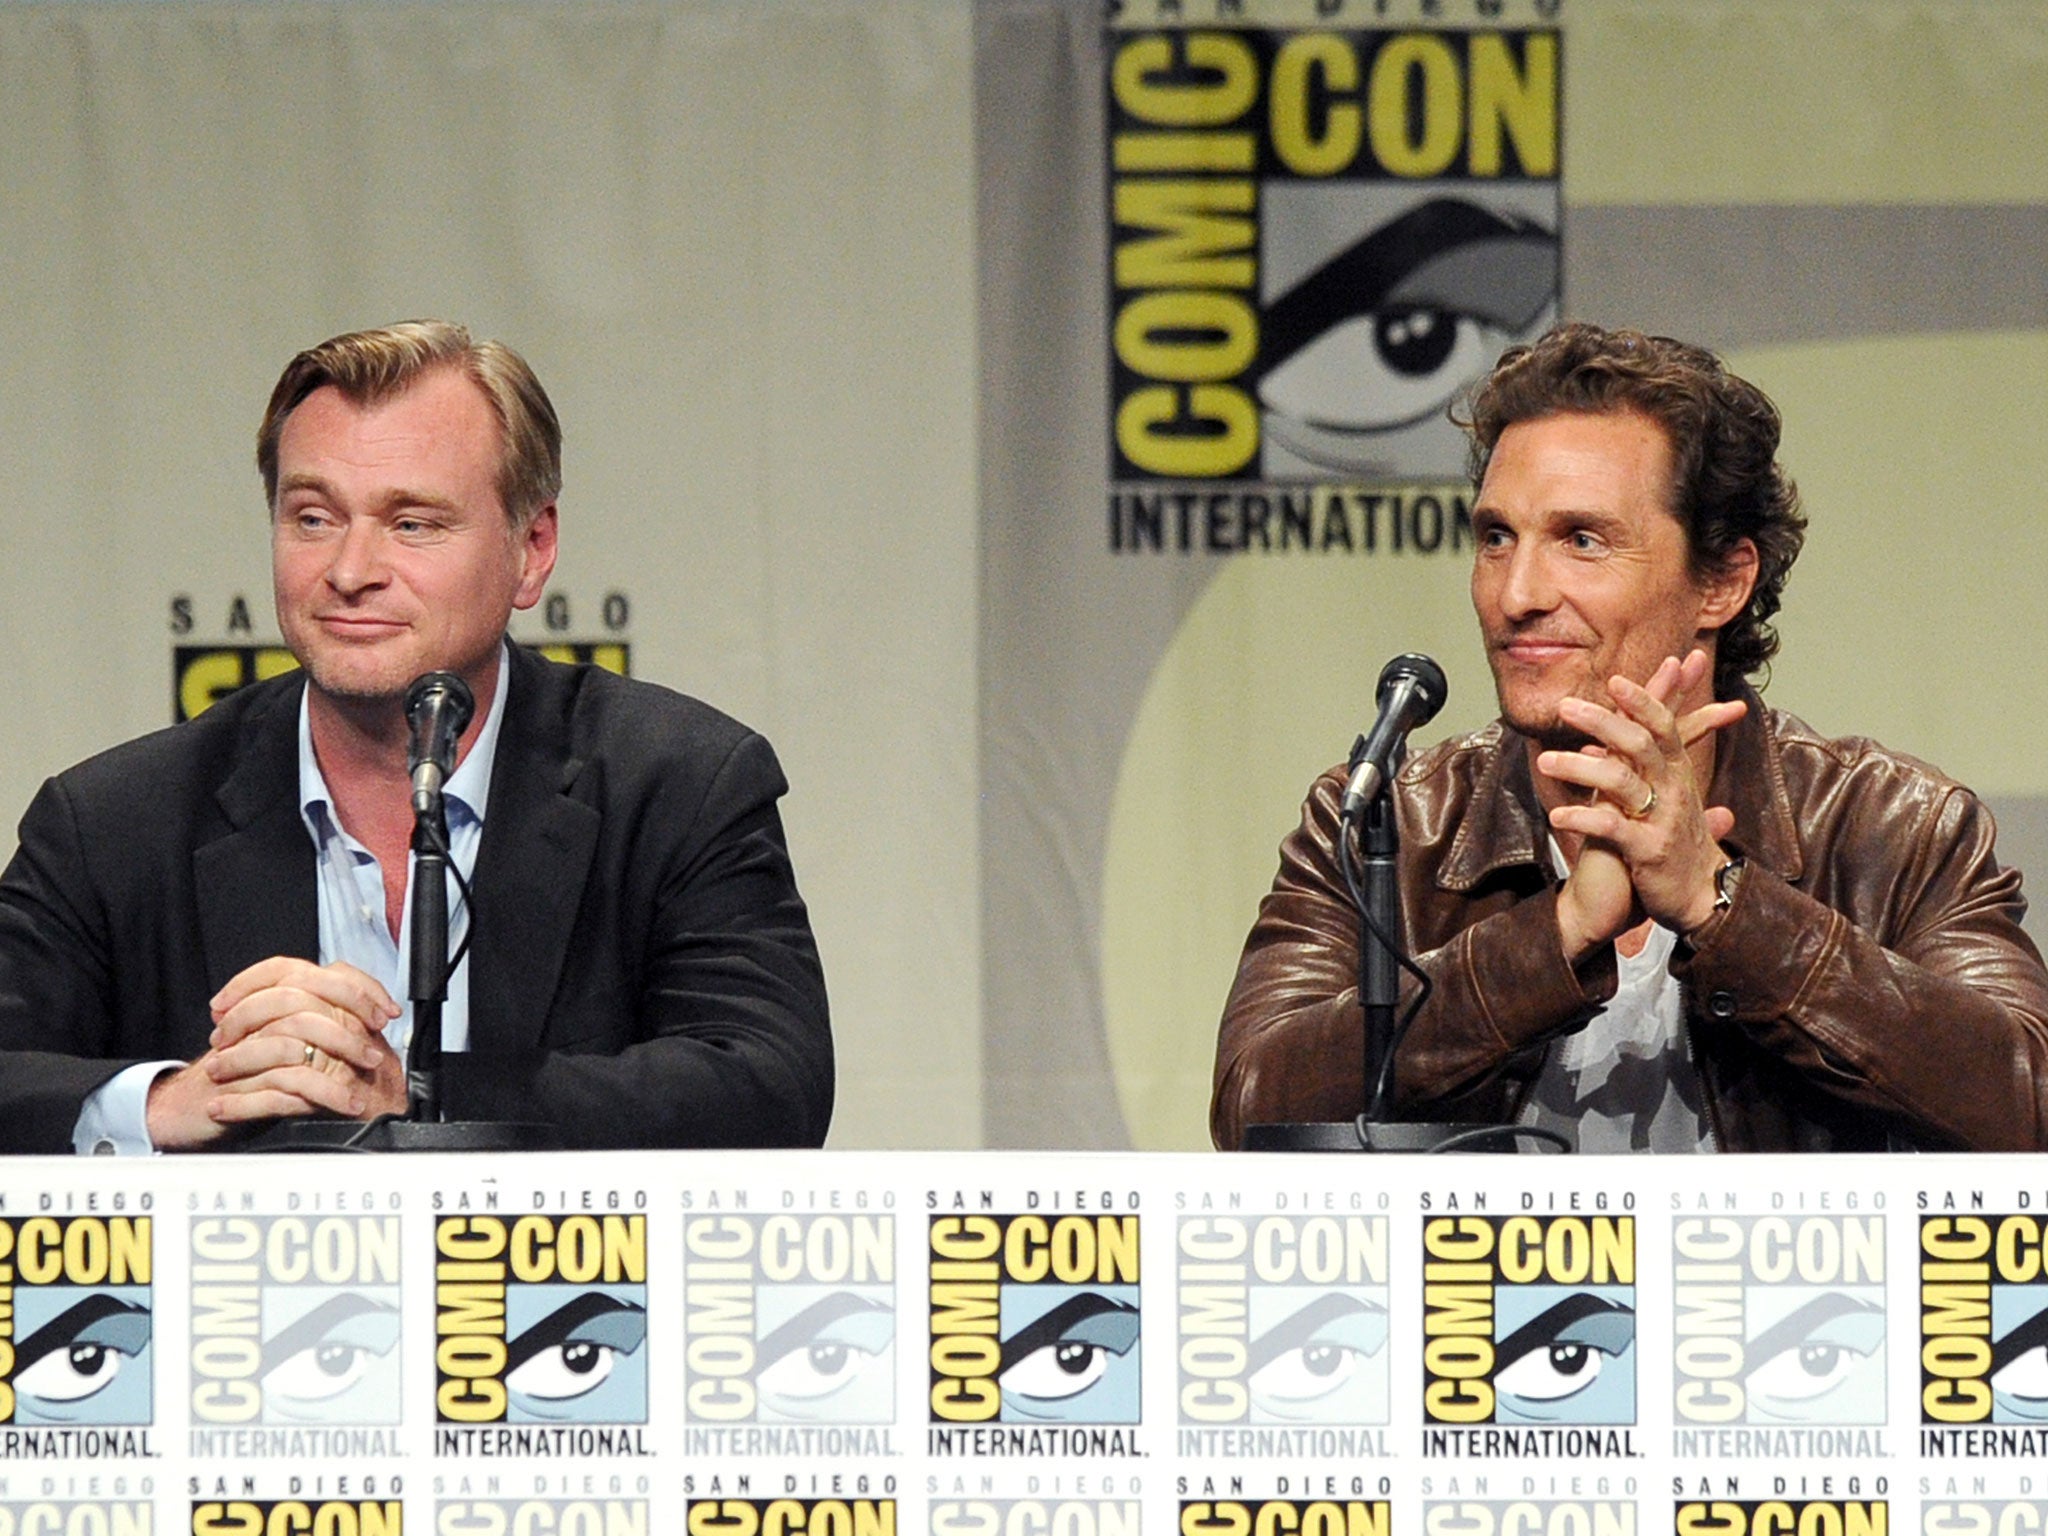 Christopher Nolan and Matthew McConaughey surprise fans at Comic-Con